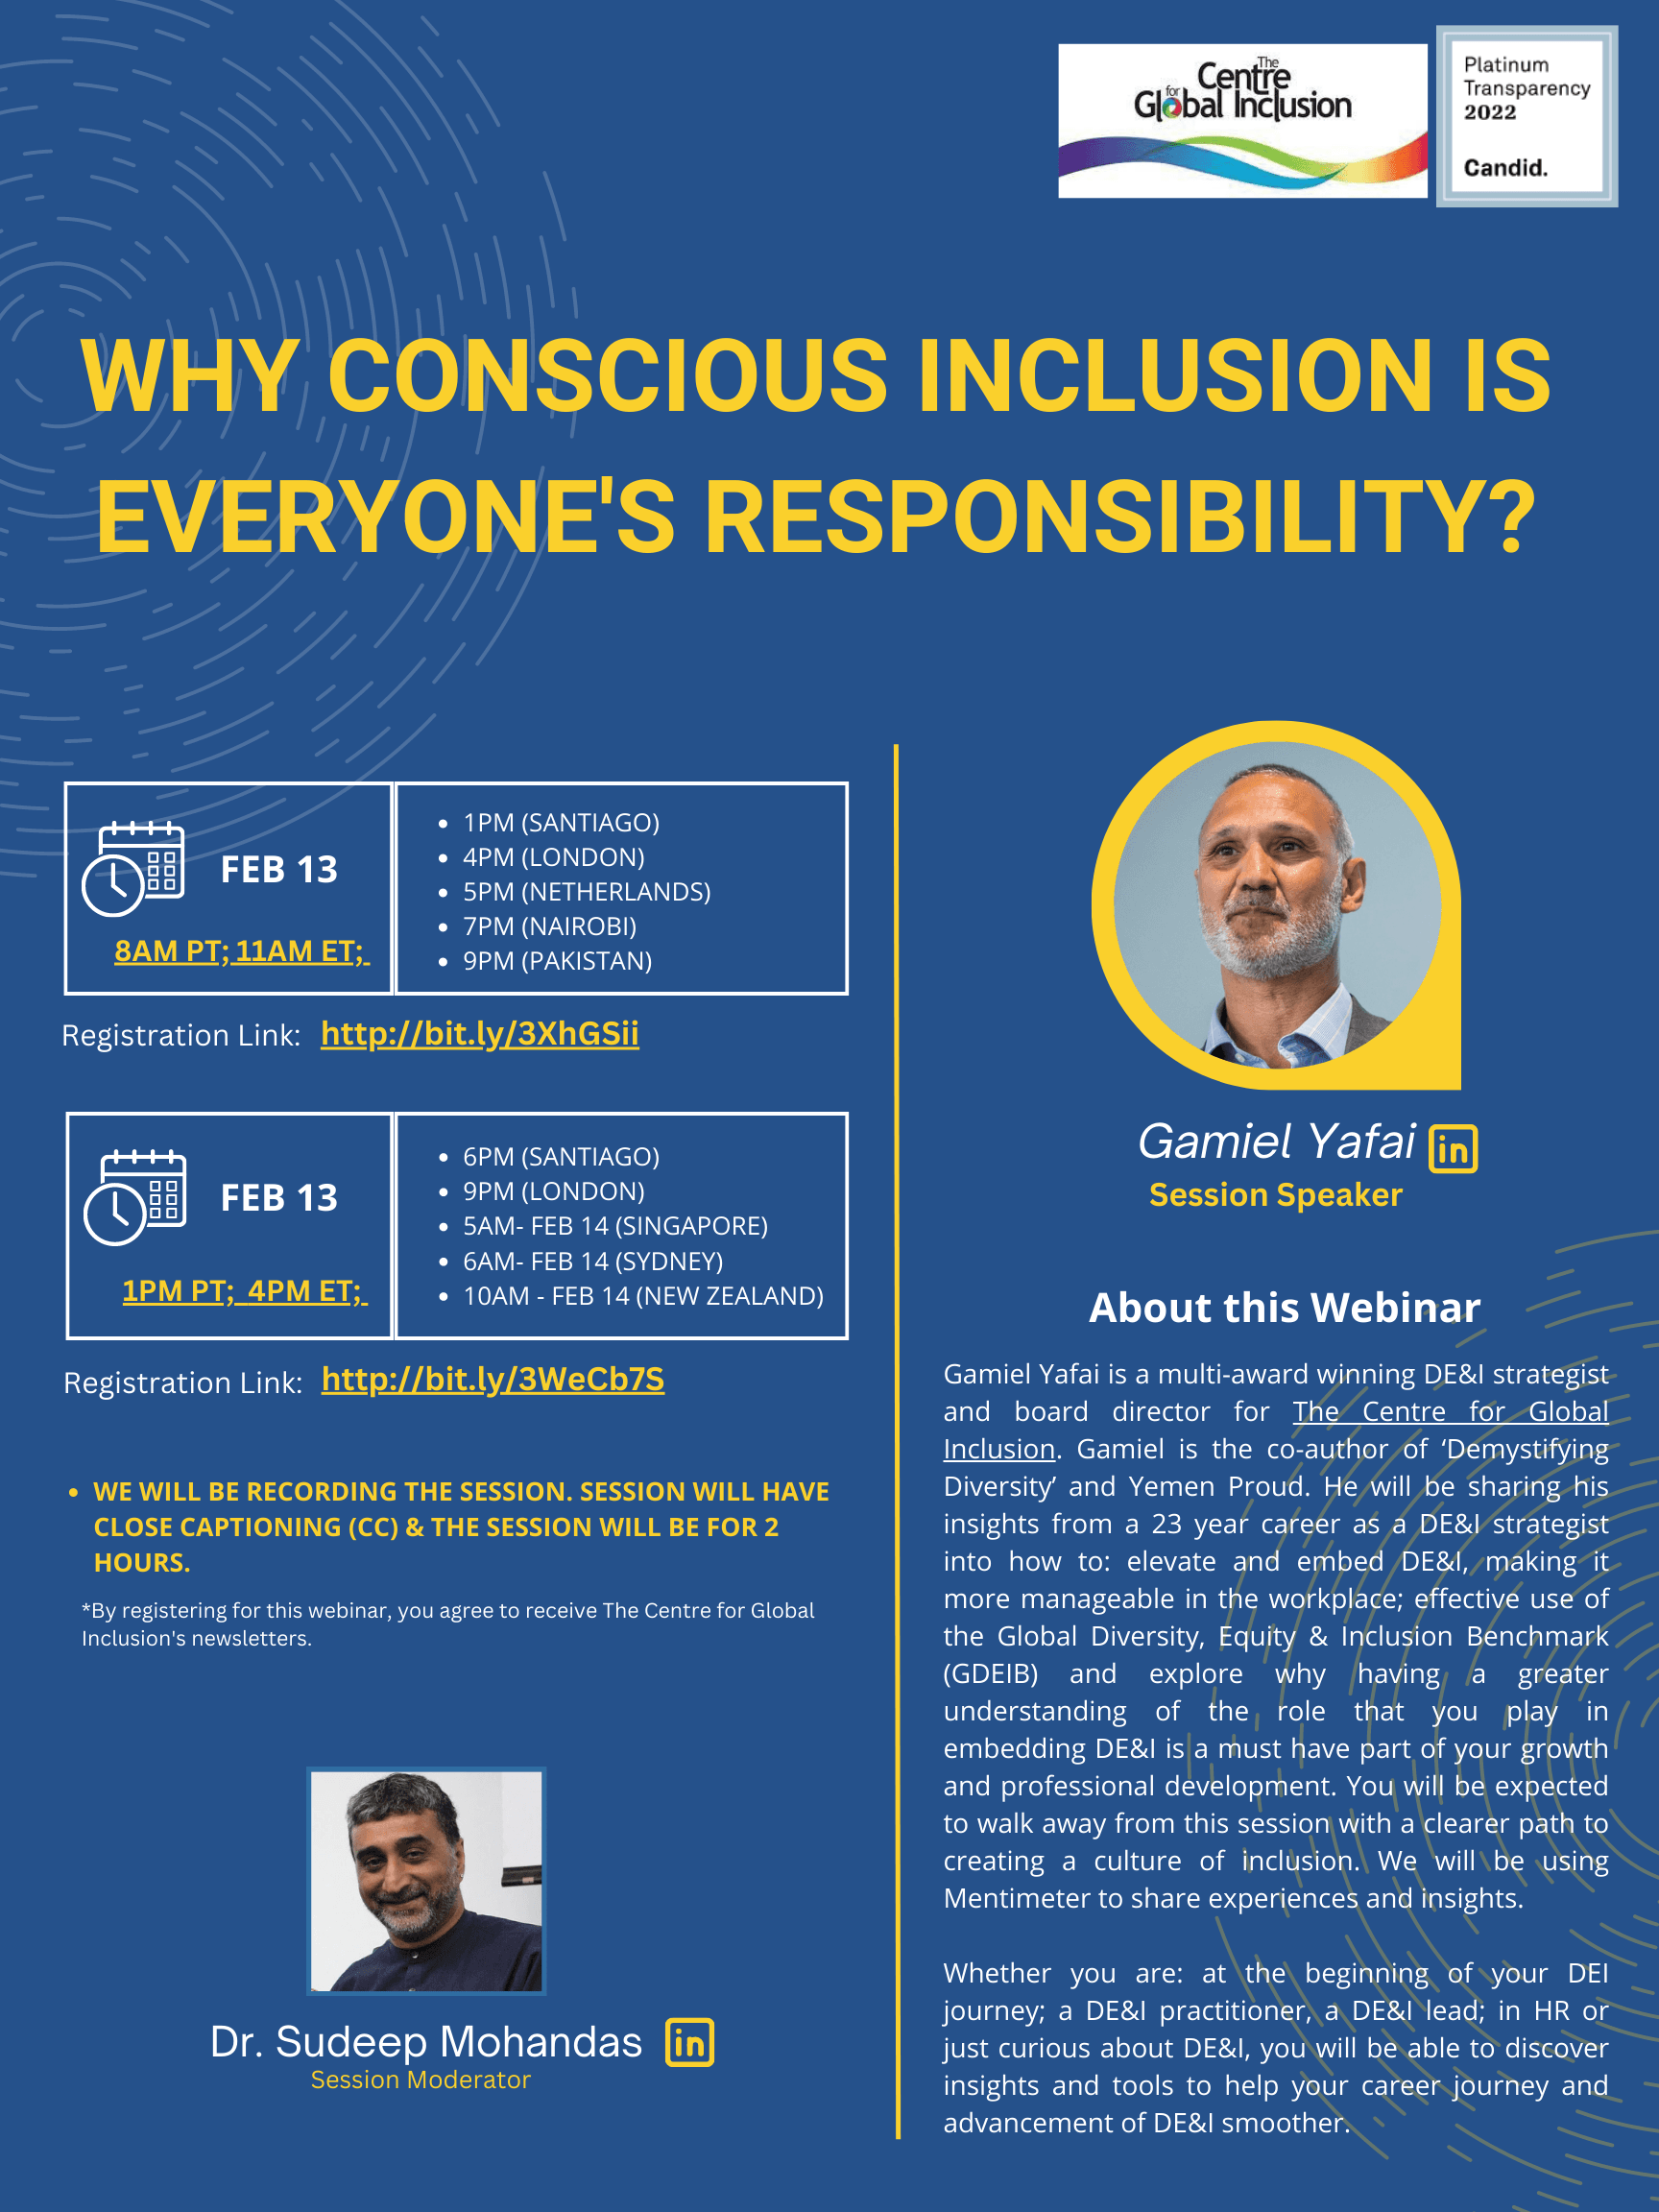 Why Conscious Inclusion is everyone's responsibility?